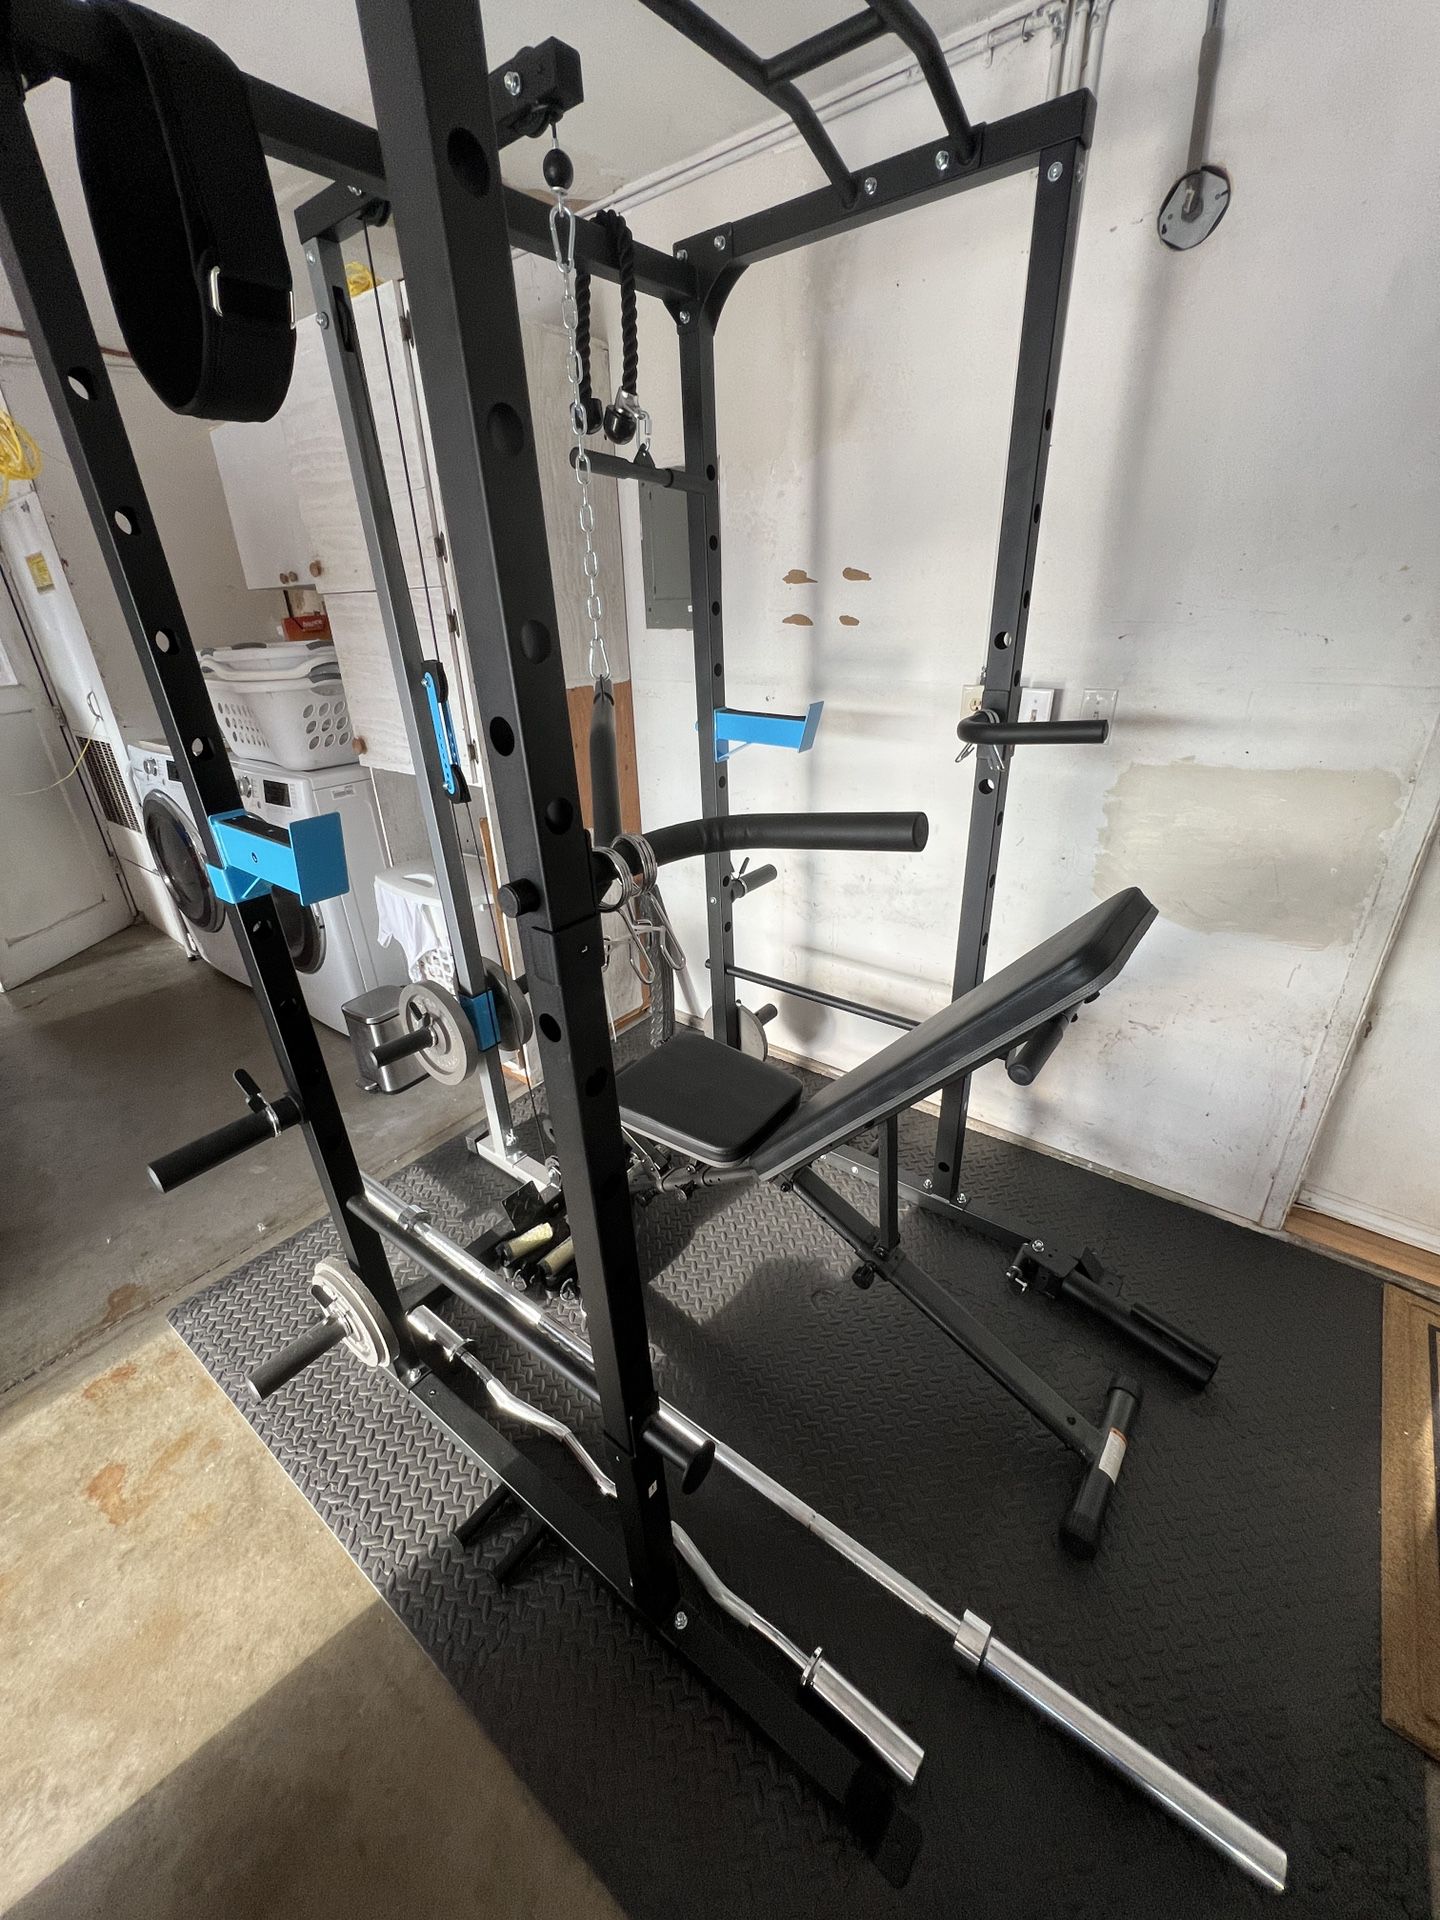 Home Gym Setup w/ Power Cage, Squat Rack With Lat Pull Down/Dip Bars/Pull Ups Complete 